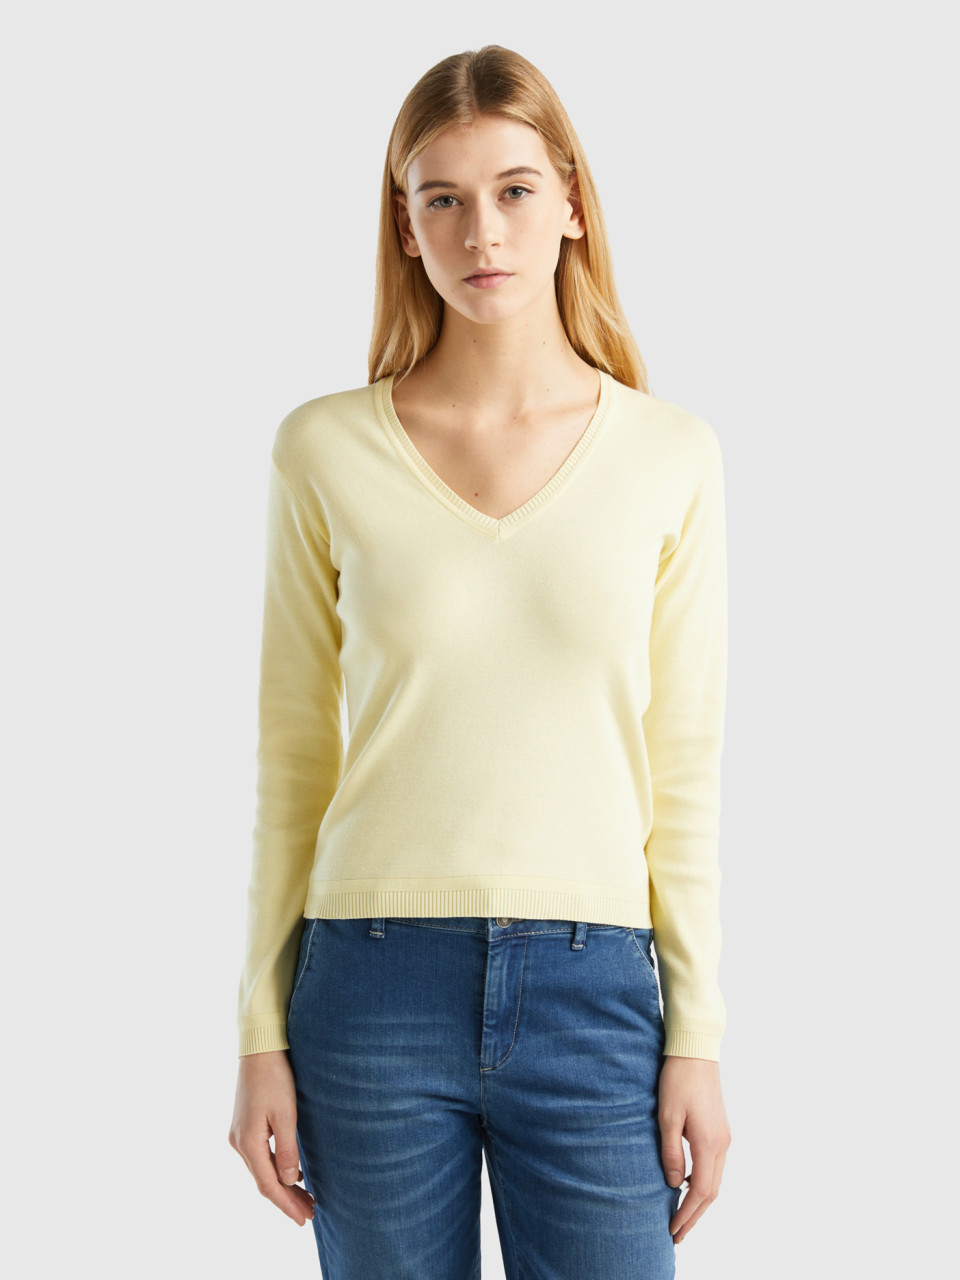 Benetton, V-neck Sweater In Pure Cotton, Yellow, Women